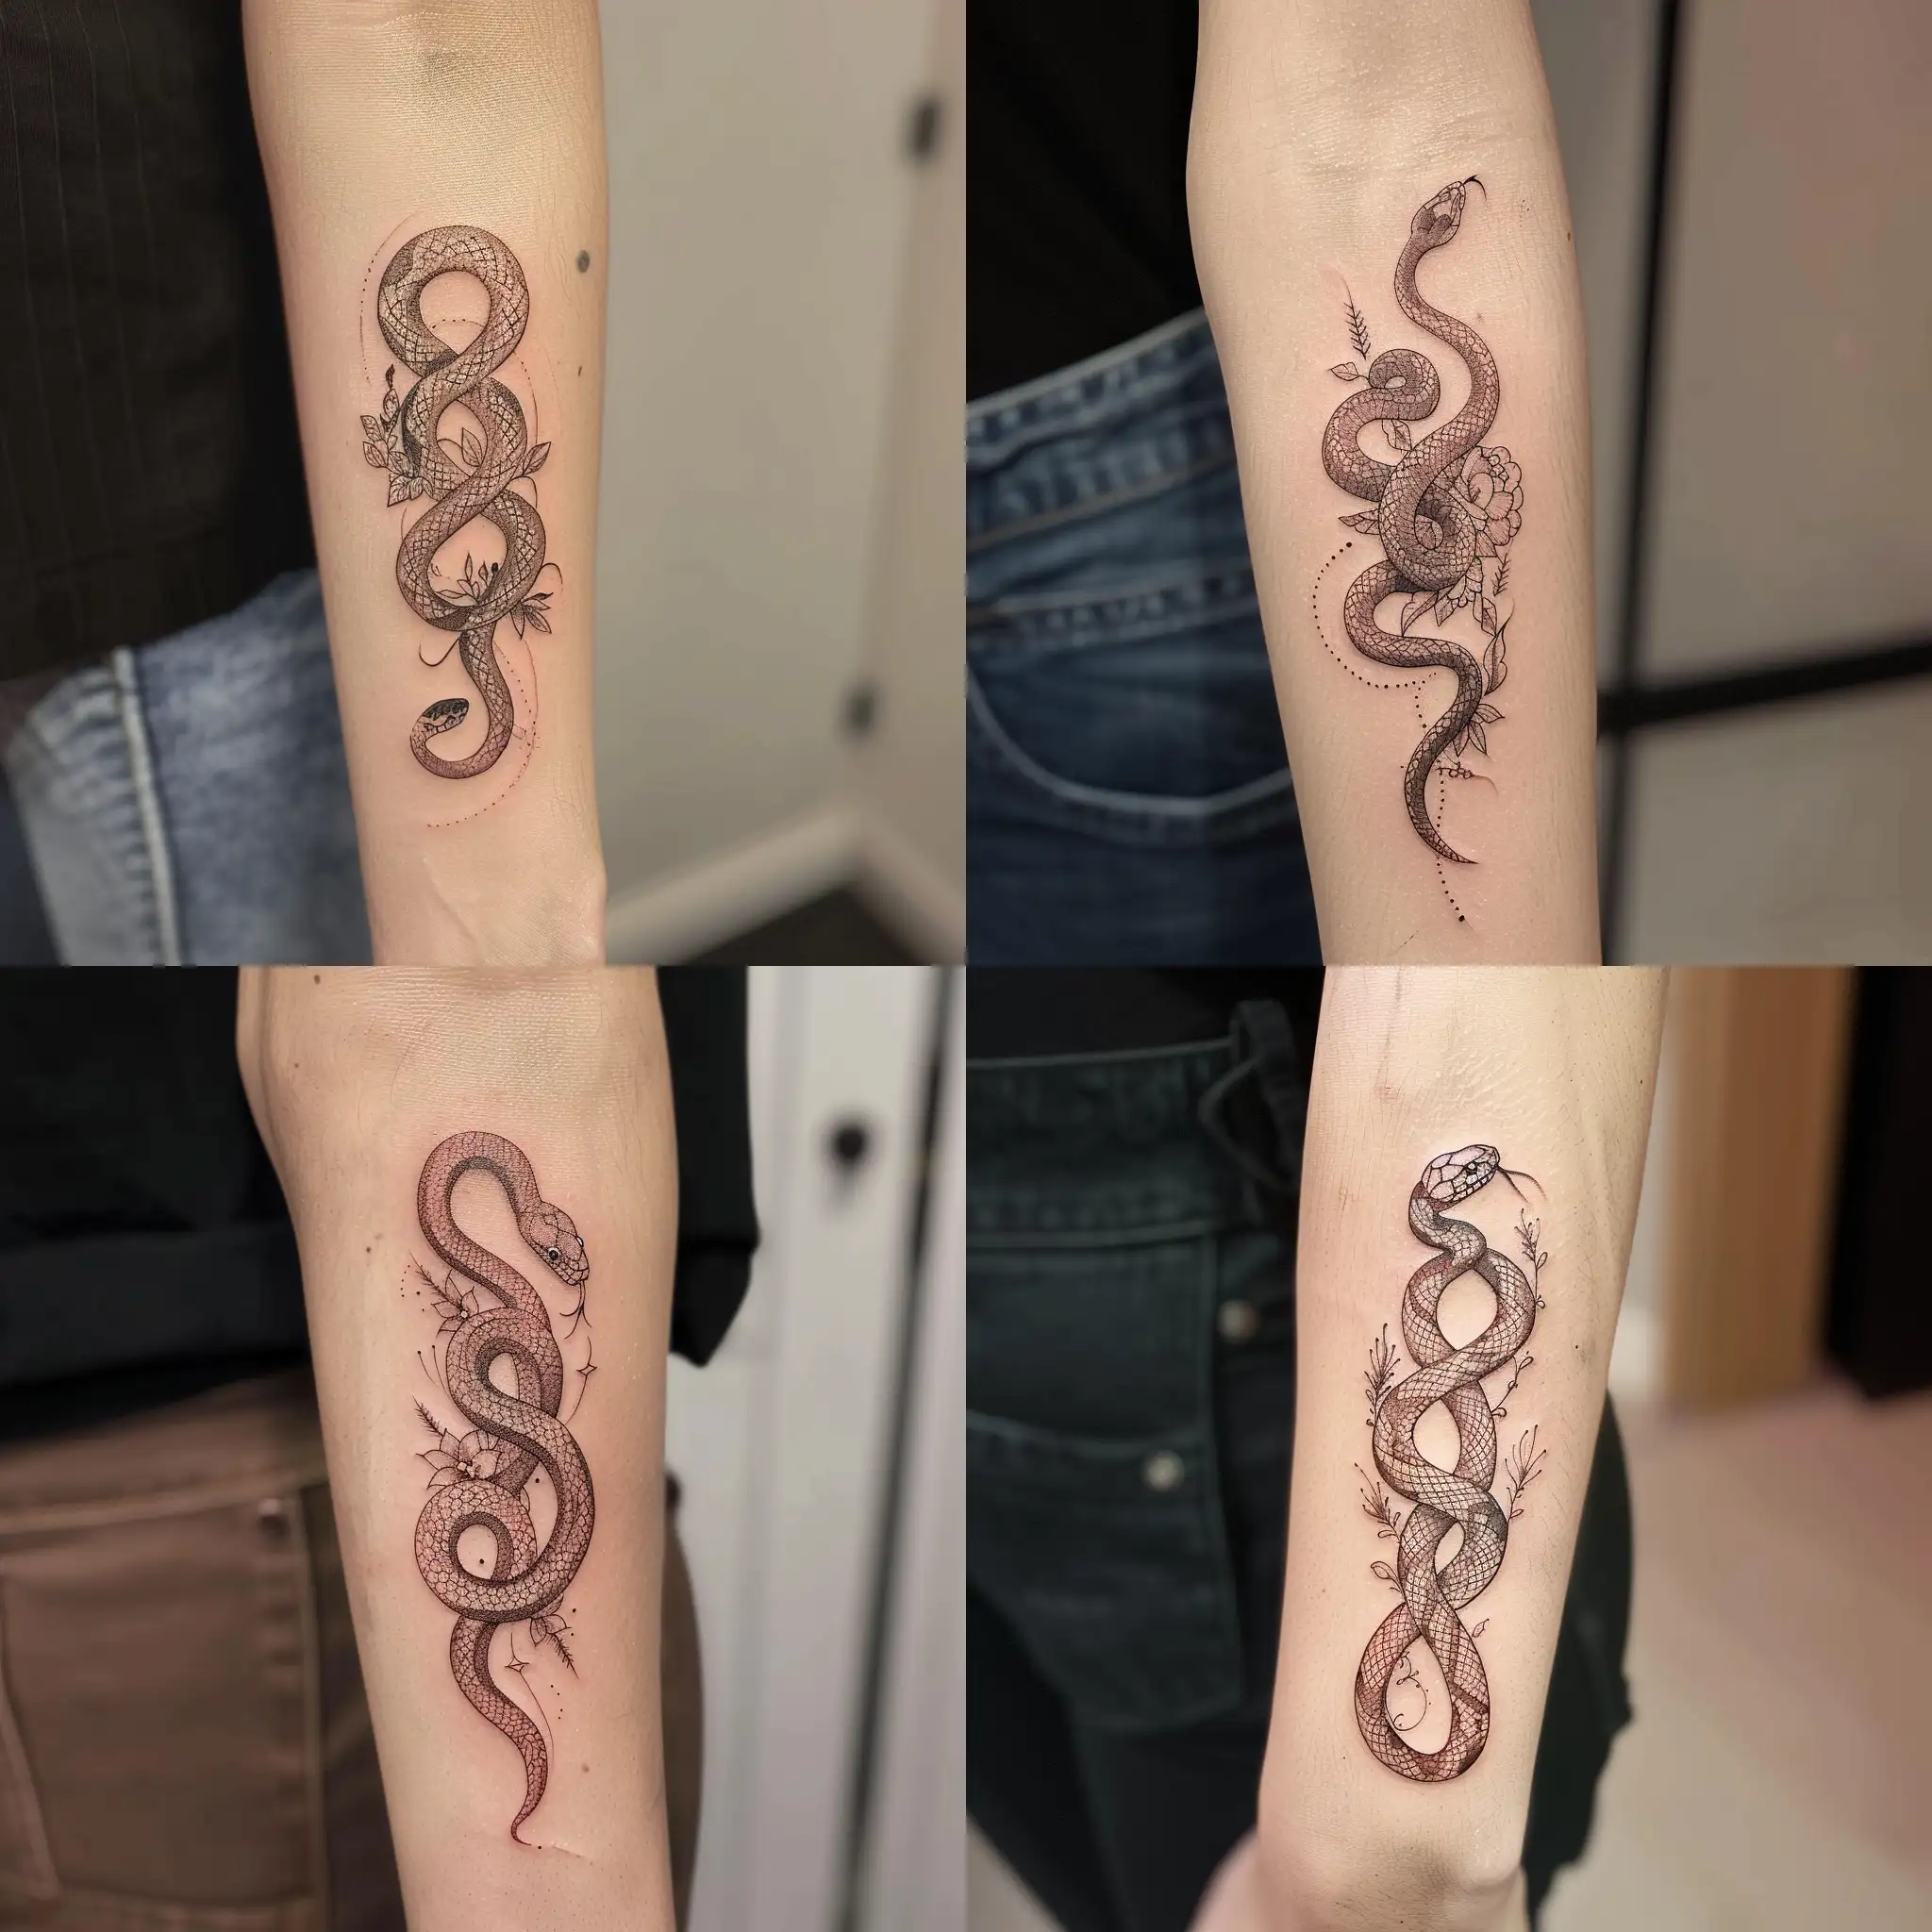 Tender-Snake-Tattoo-with-Floral-Sketch-Elements